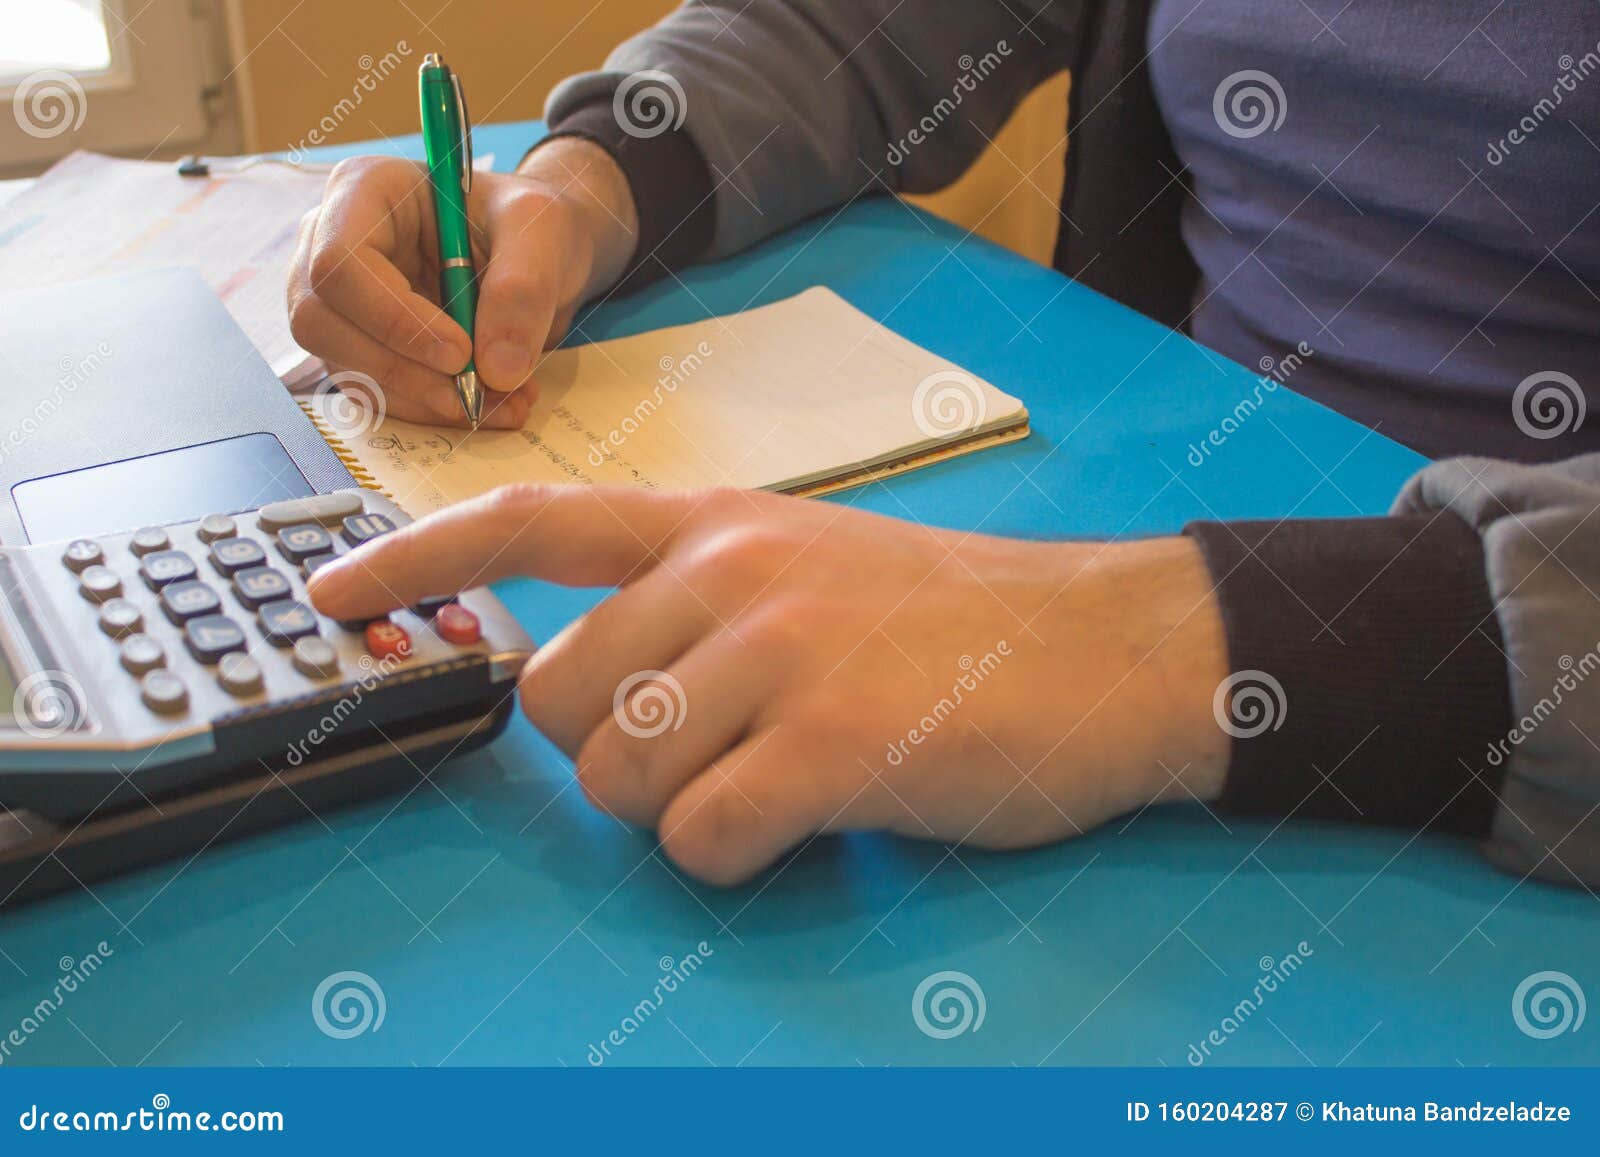 Man Writing Notes from Computer on Table. Man Hand with Pen